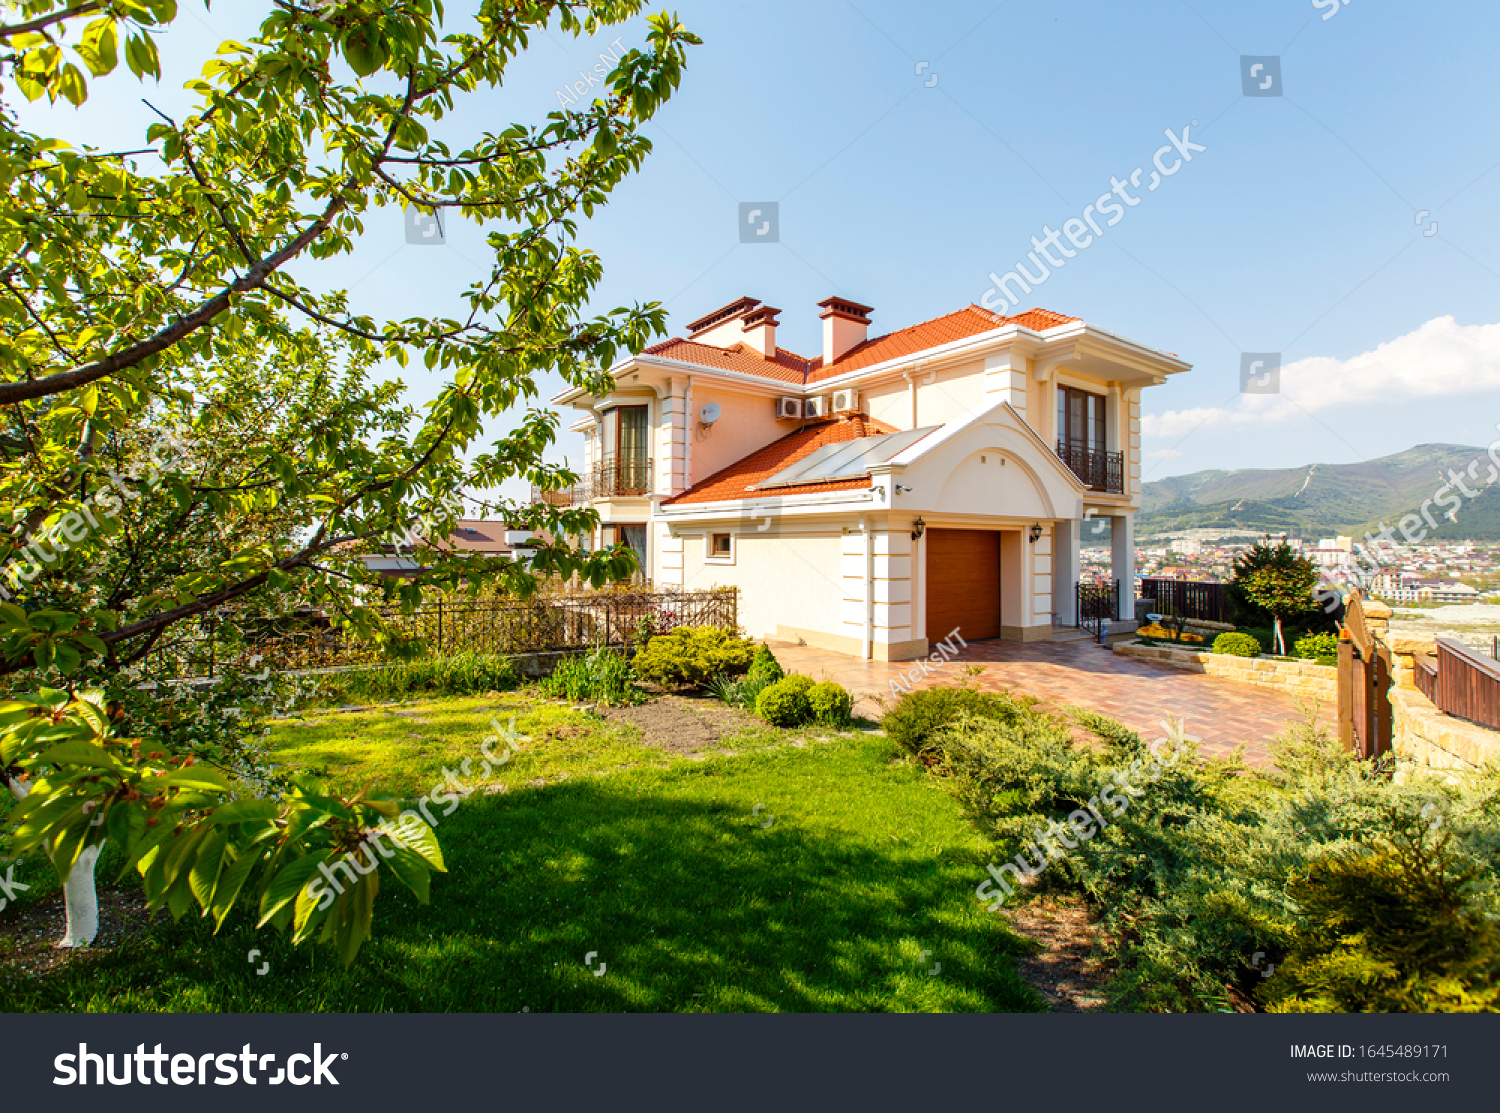 The facade of a classic Mediterranean two-storey cottage in the spring. The cottage is white with a red tiled roof. In front of the cottage there is a green lawn and flowering trees.  #1645489171